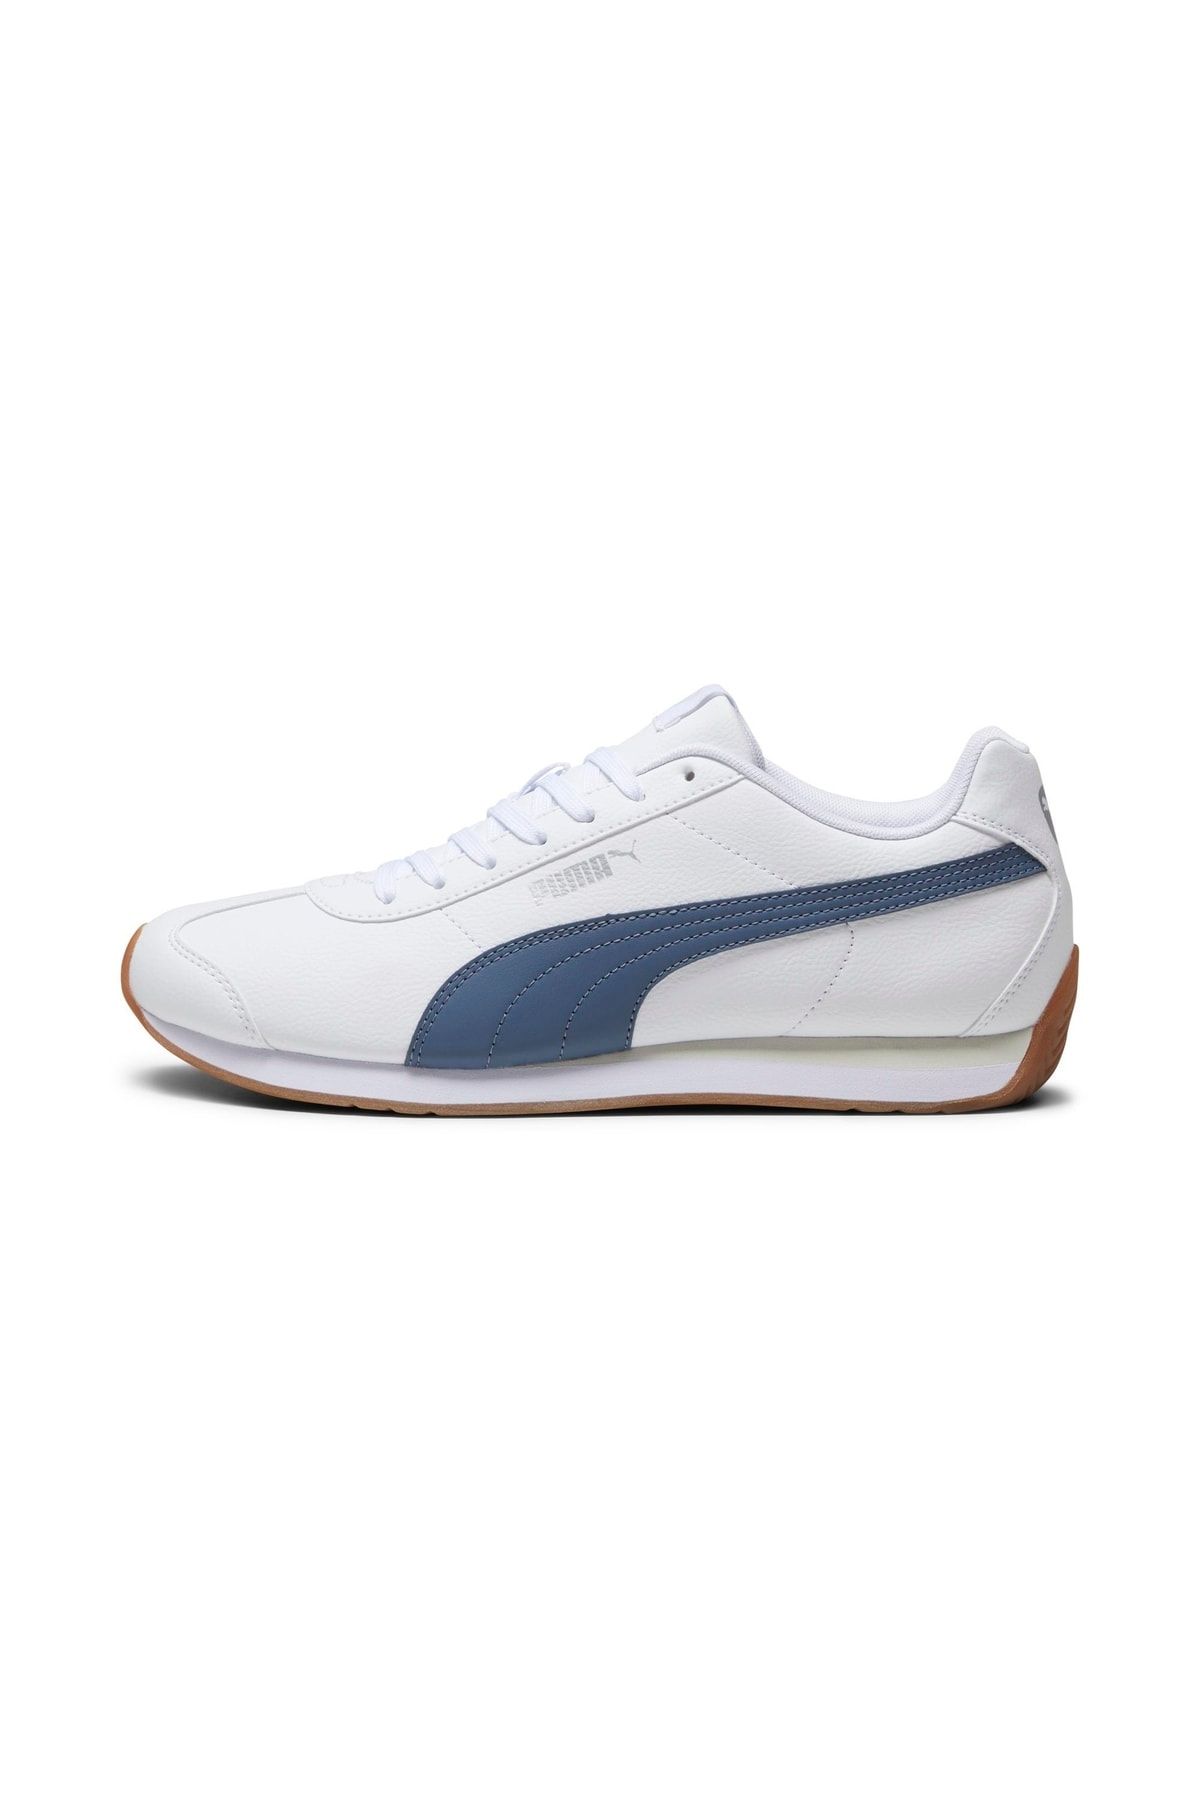 Buy Puma Turin Ii Unisex White Casual Shoes - 12 Online